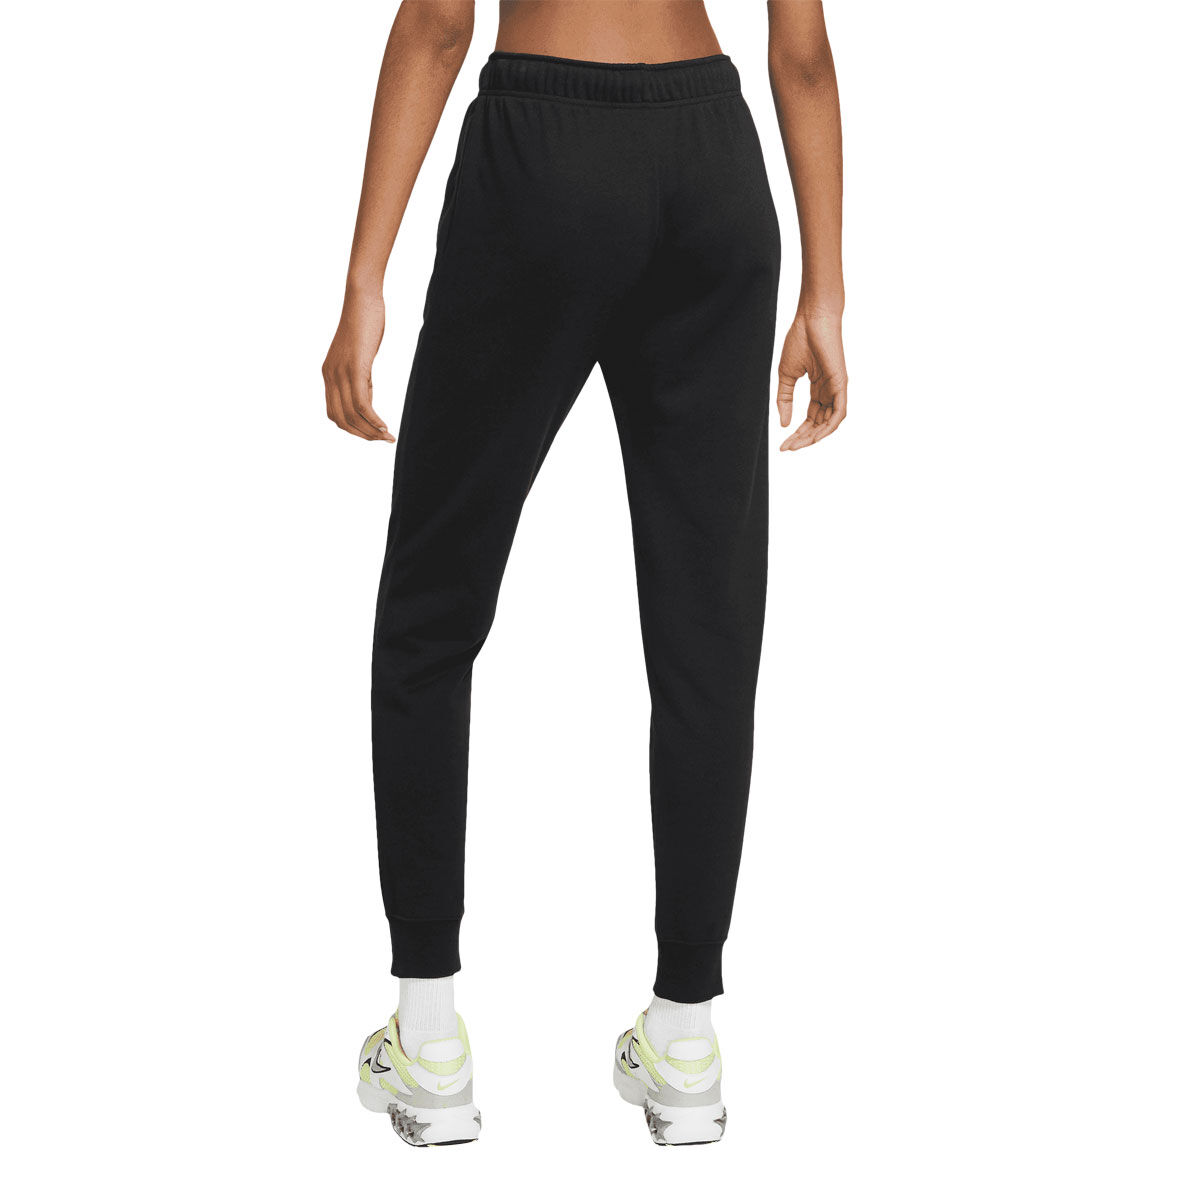 Nike Women's Track Pants (CJ3921-010 Black/White_Large) : Amazon.in:  Clothing & Accessories